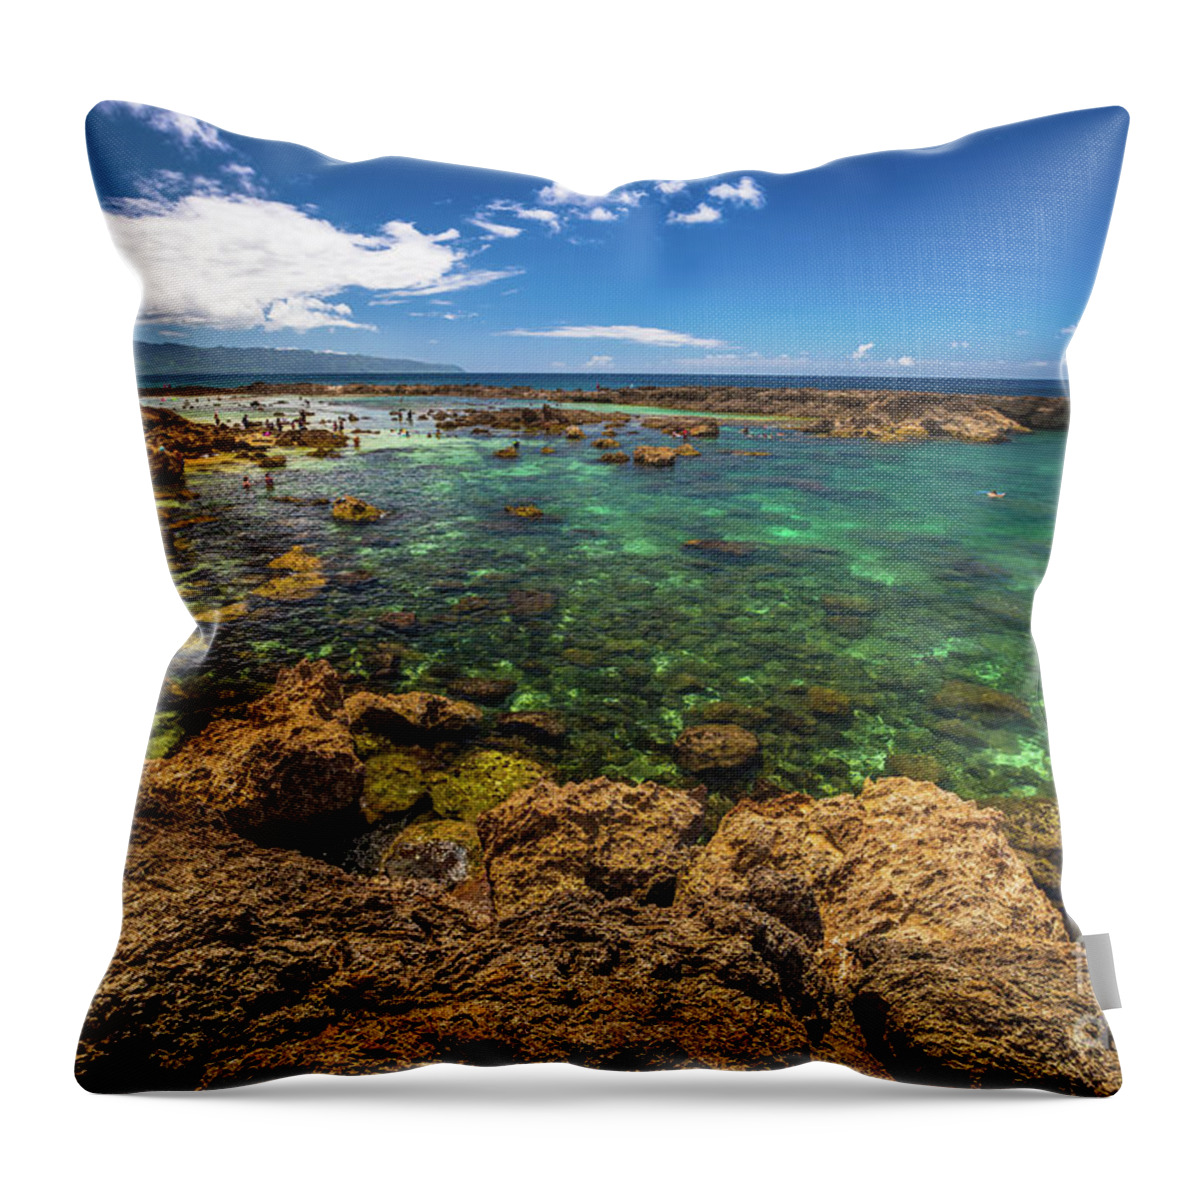 Hawaii Throw Pillow featuring the photograph Pupukea Sharks Cove by Benny Marty